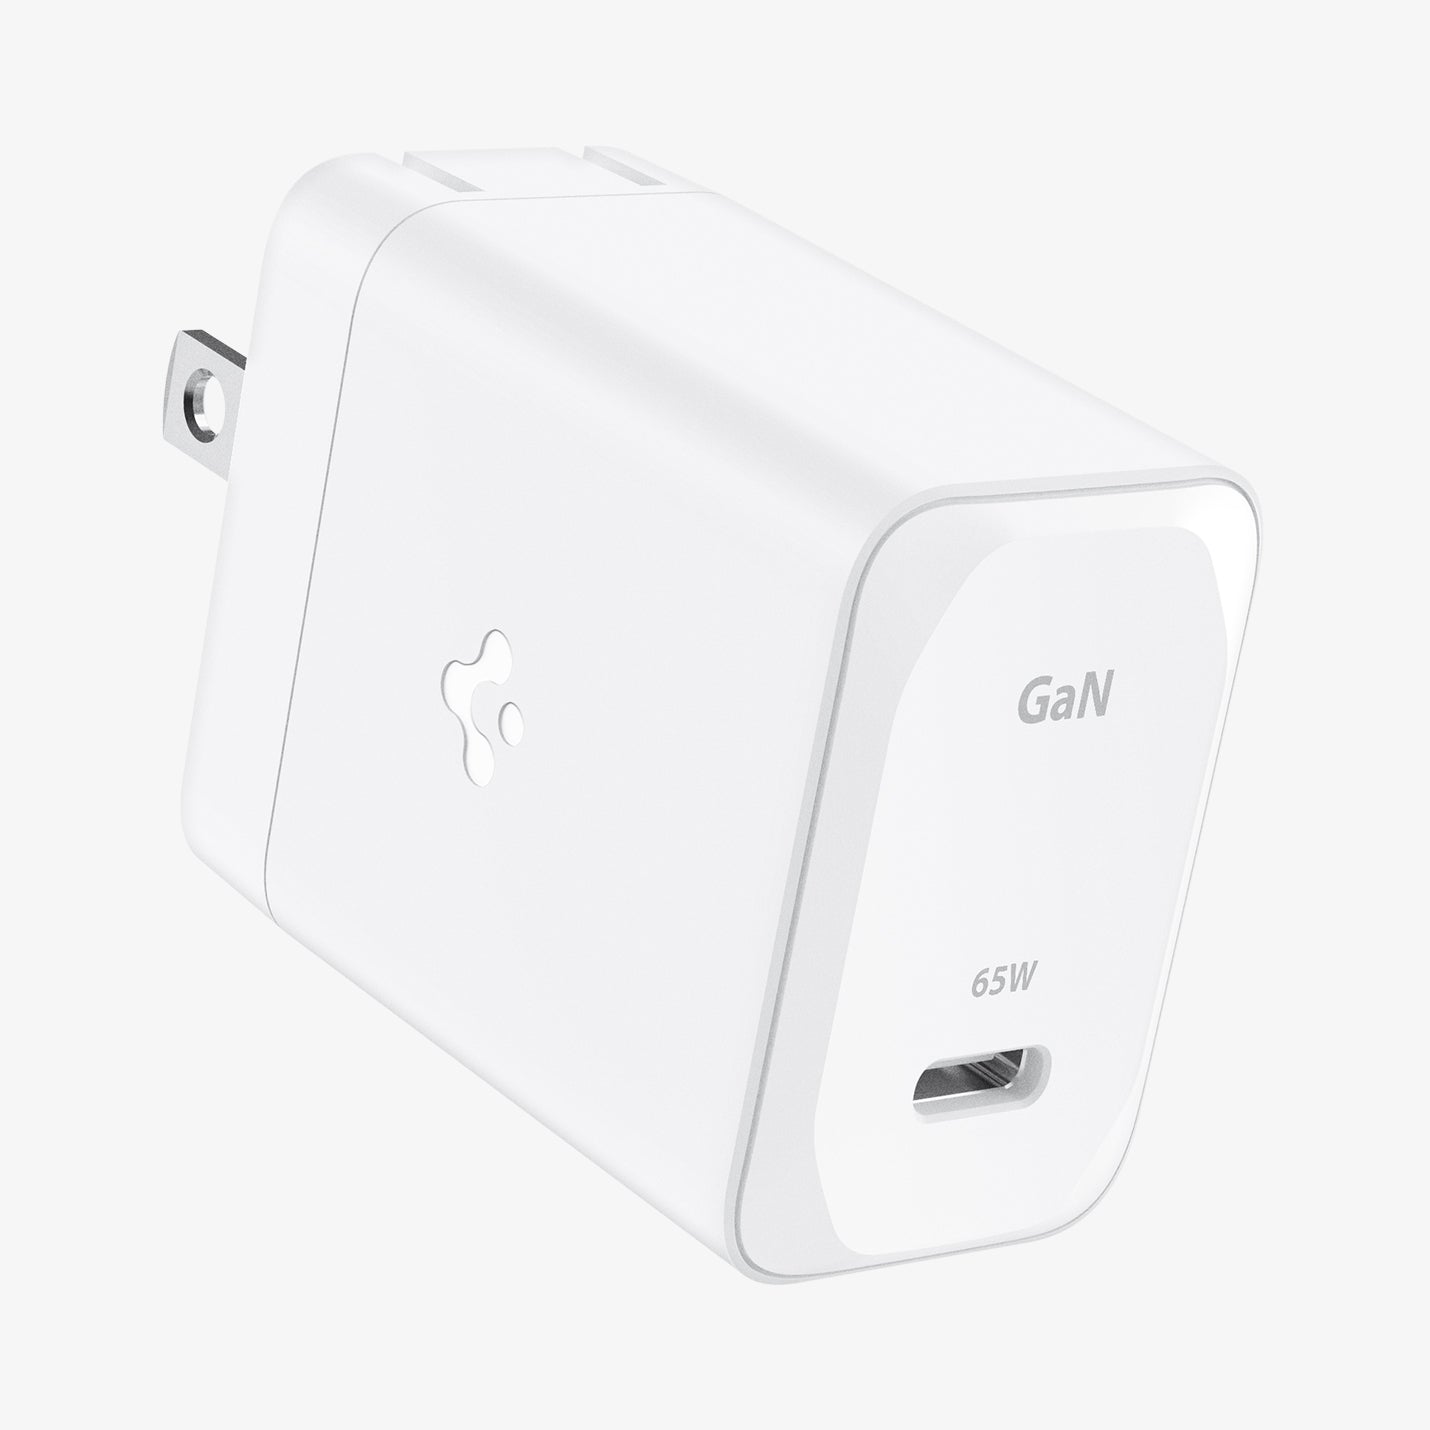 ACH05474 - ArcStation™ Pro GaN 651 Wall Charger PE2201 in White showing the top and sides with 65W charging power